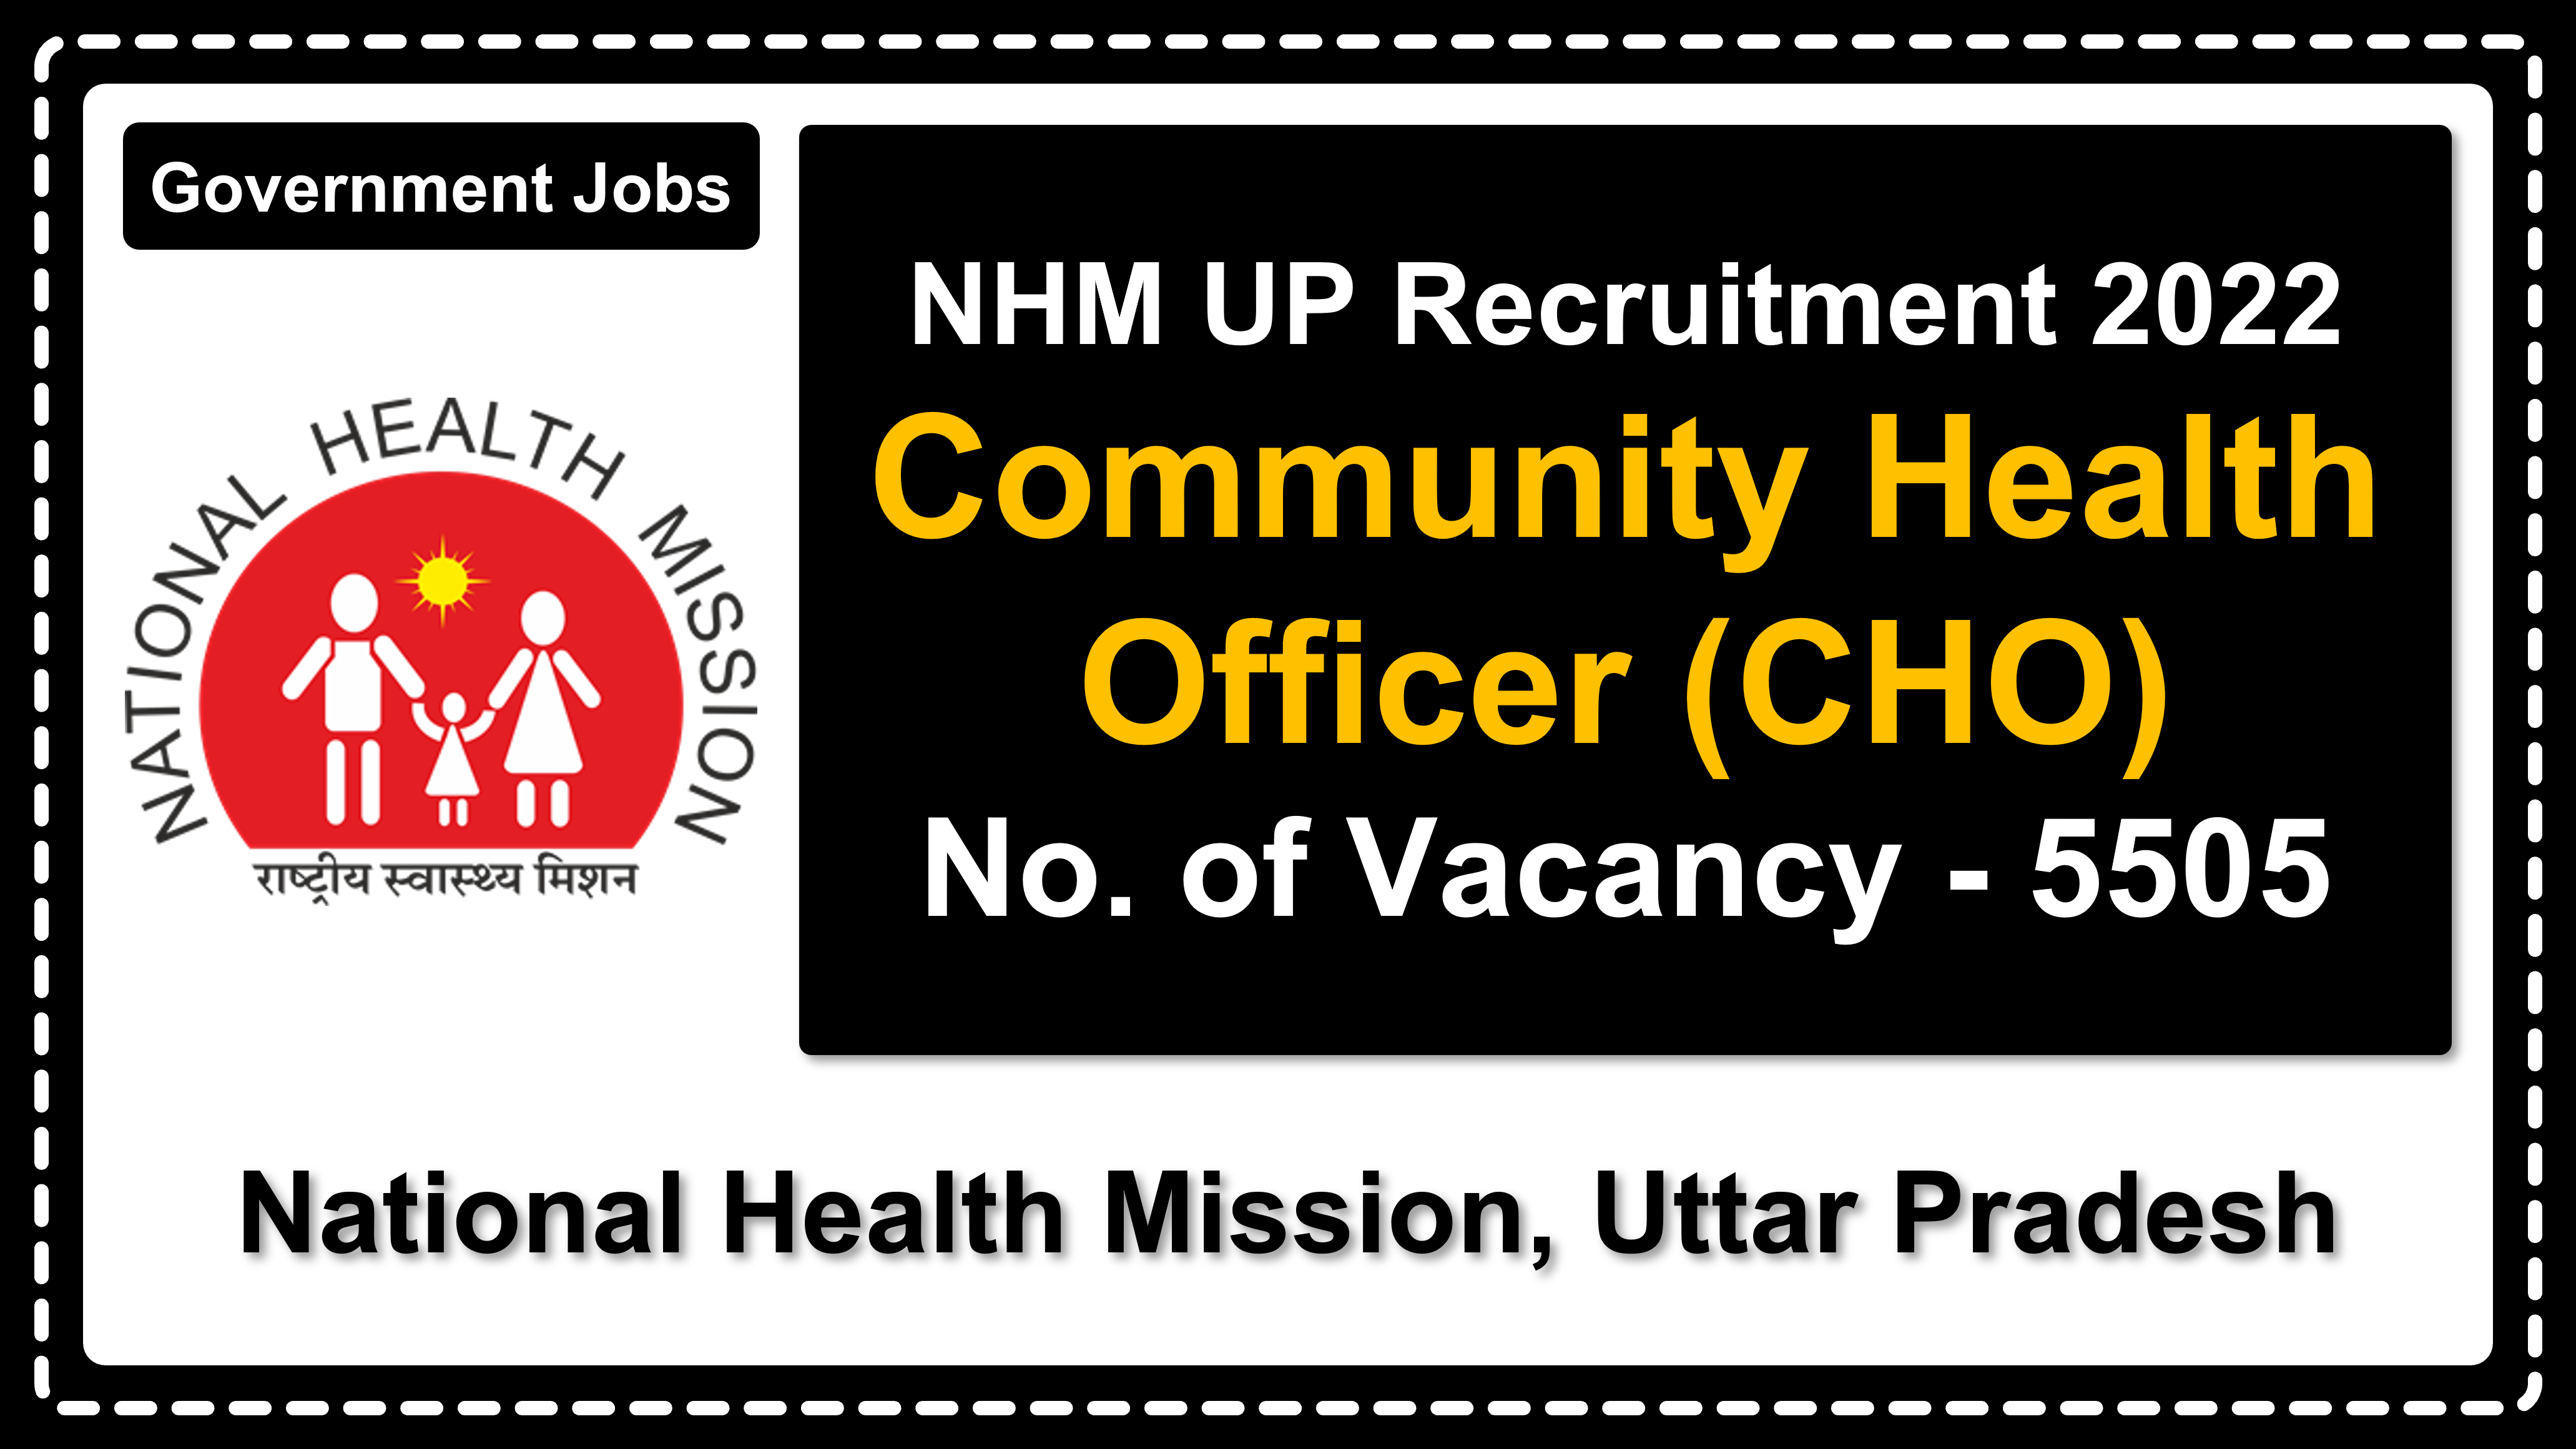 National Health Mission Ahmedabad Recruitment 2023 Apply Now | National  health, Health and wellness center, Recruitment